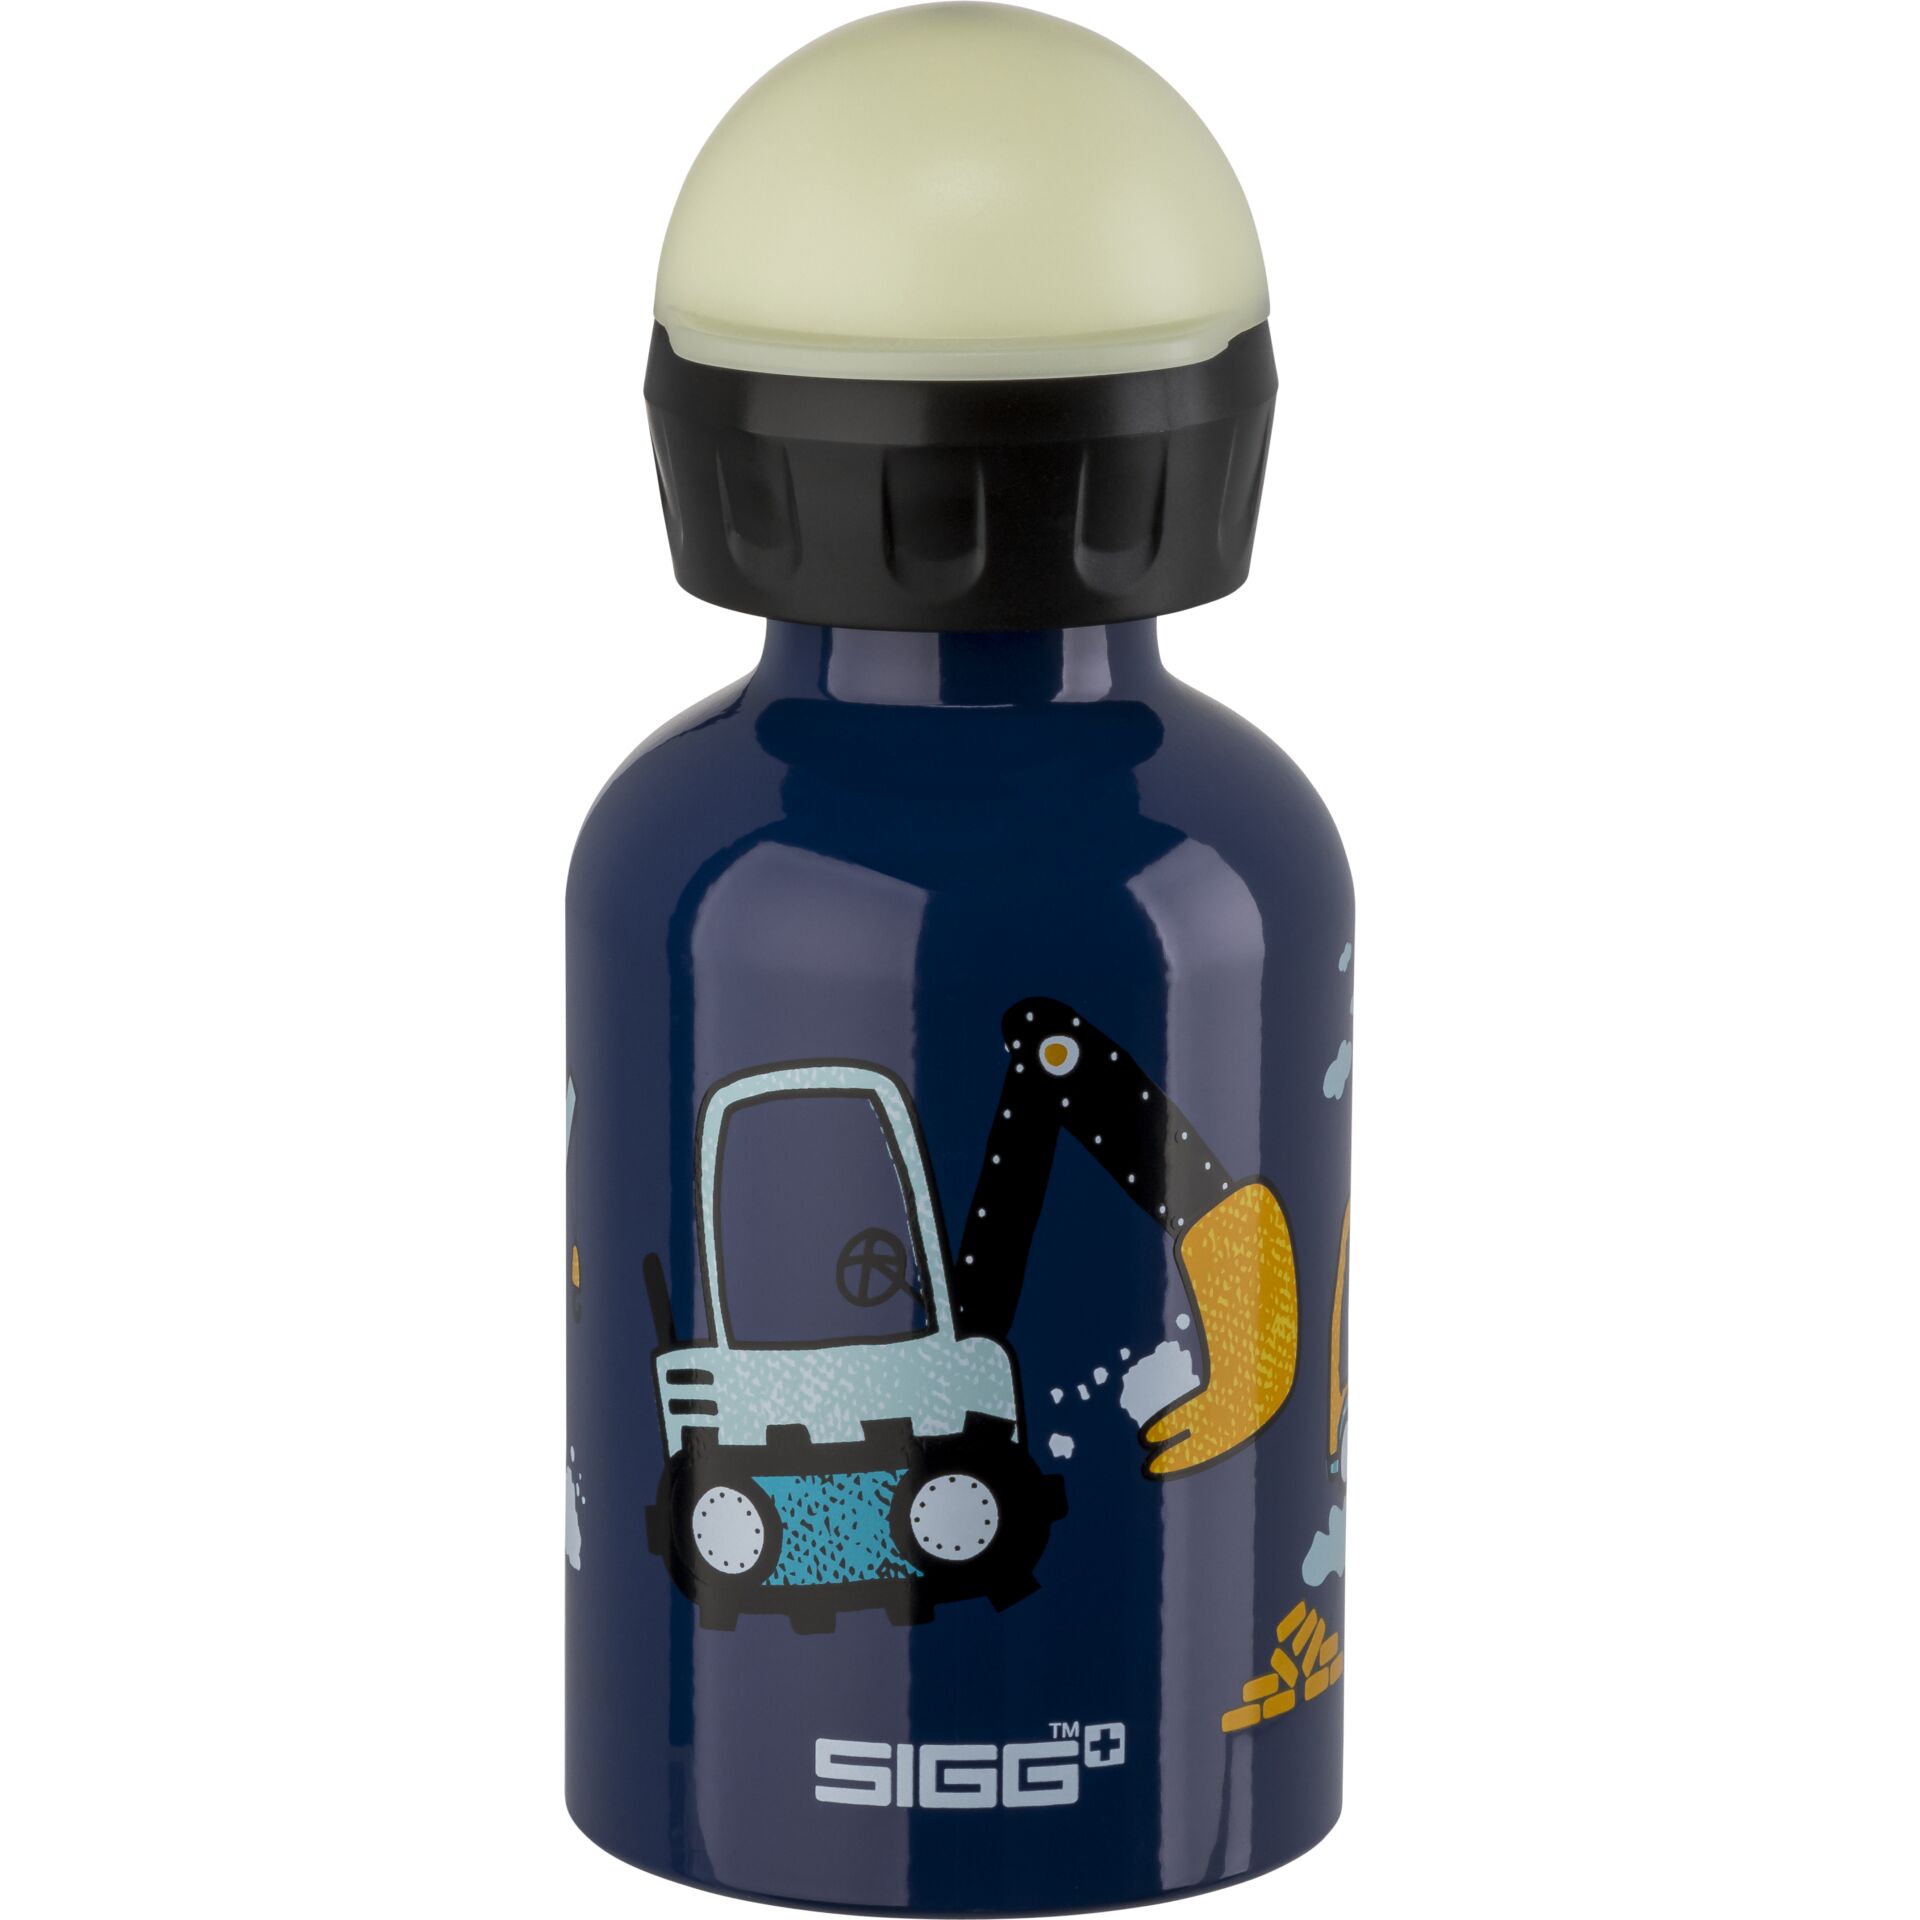 Sigg Small Water Bottle Build 0.3 L